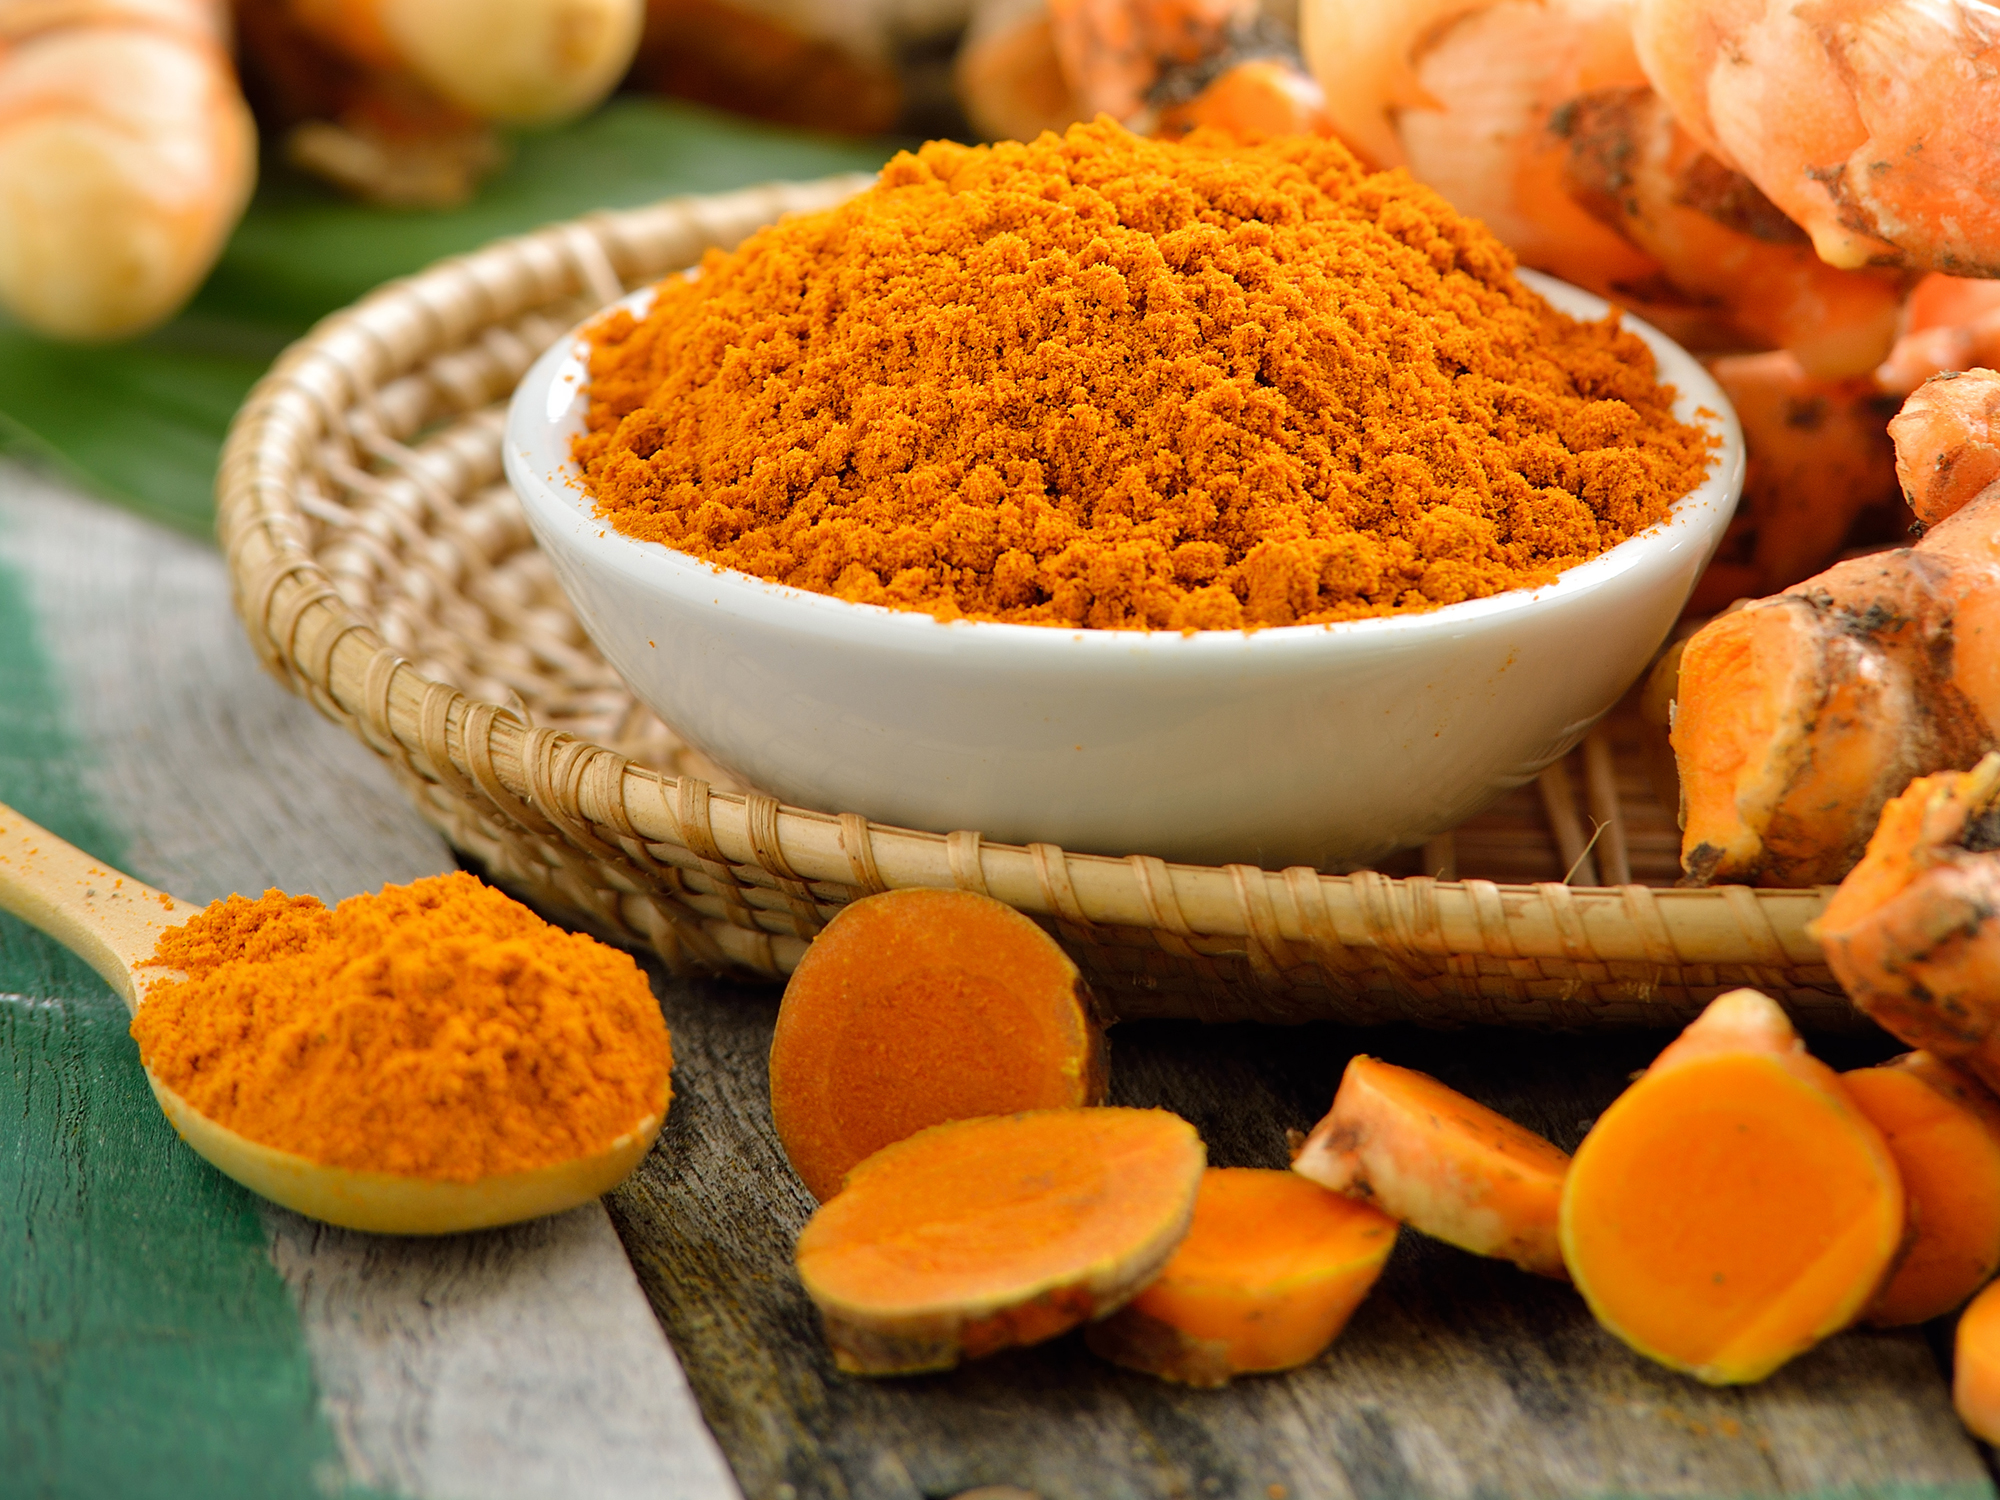 3 tips to optimize turmeric’s cancer-fighting powers